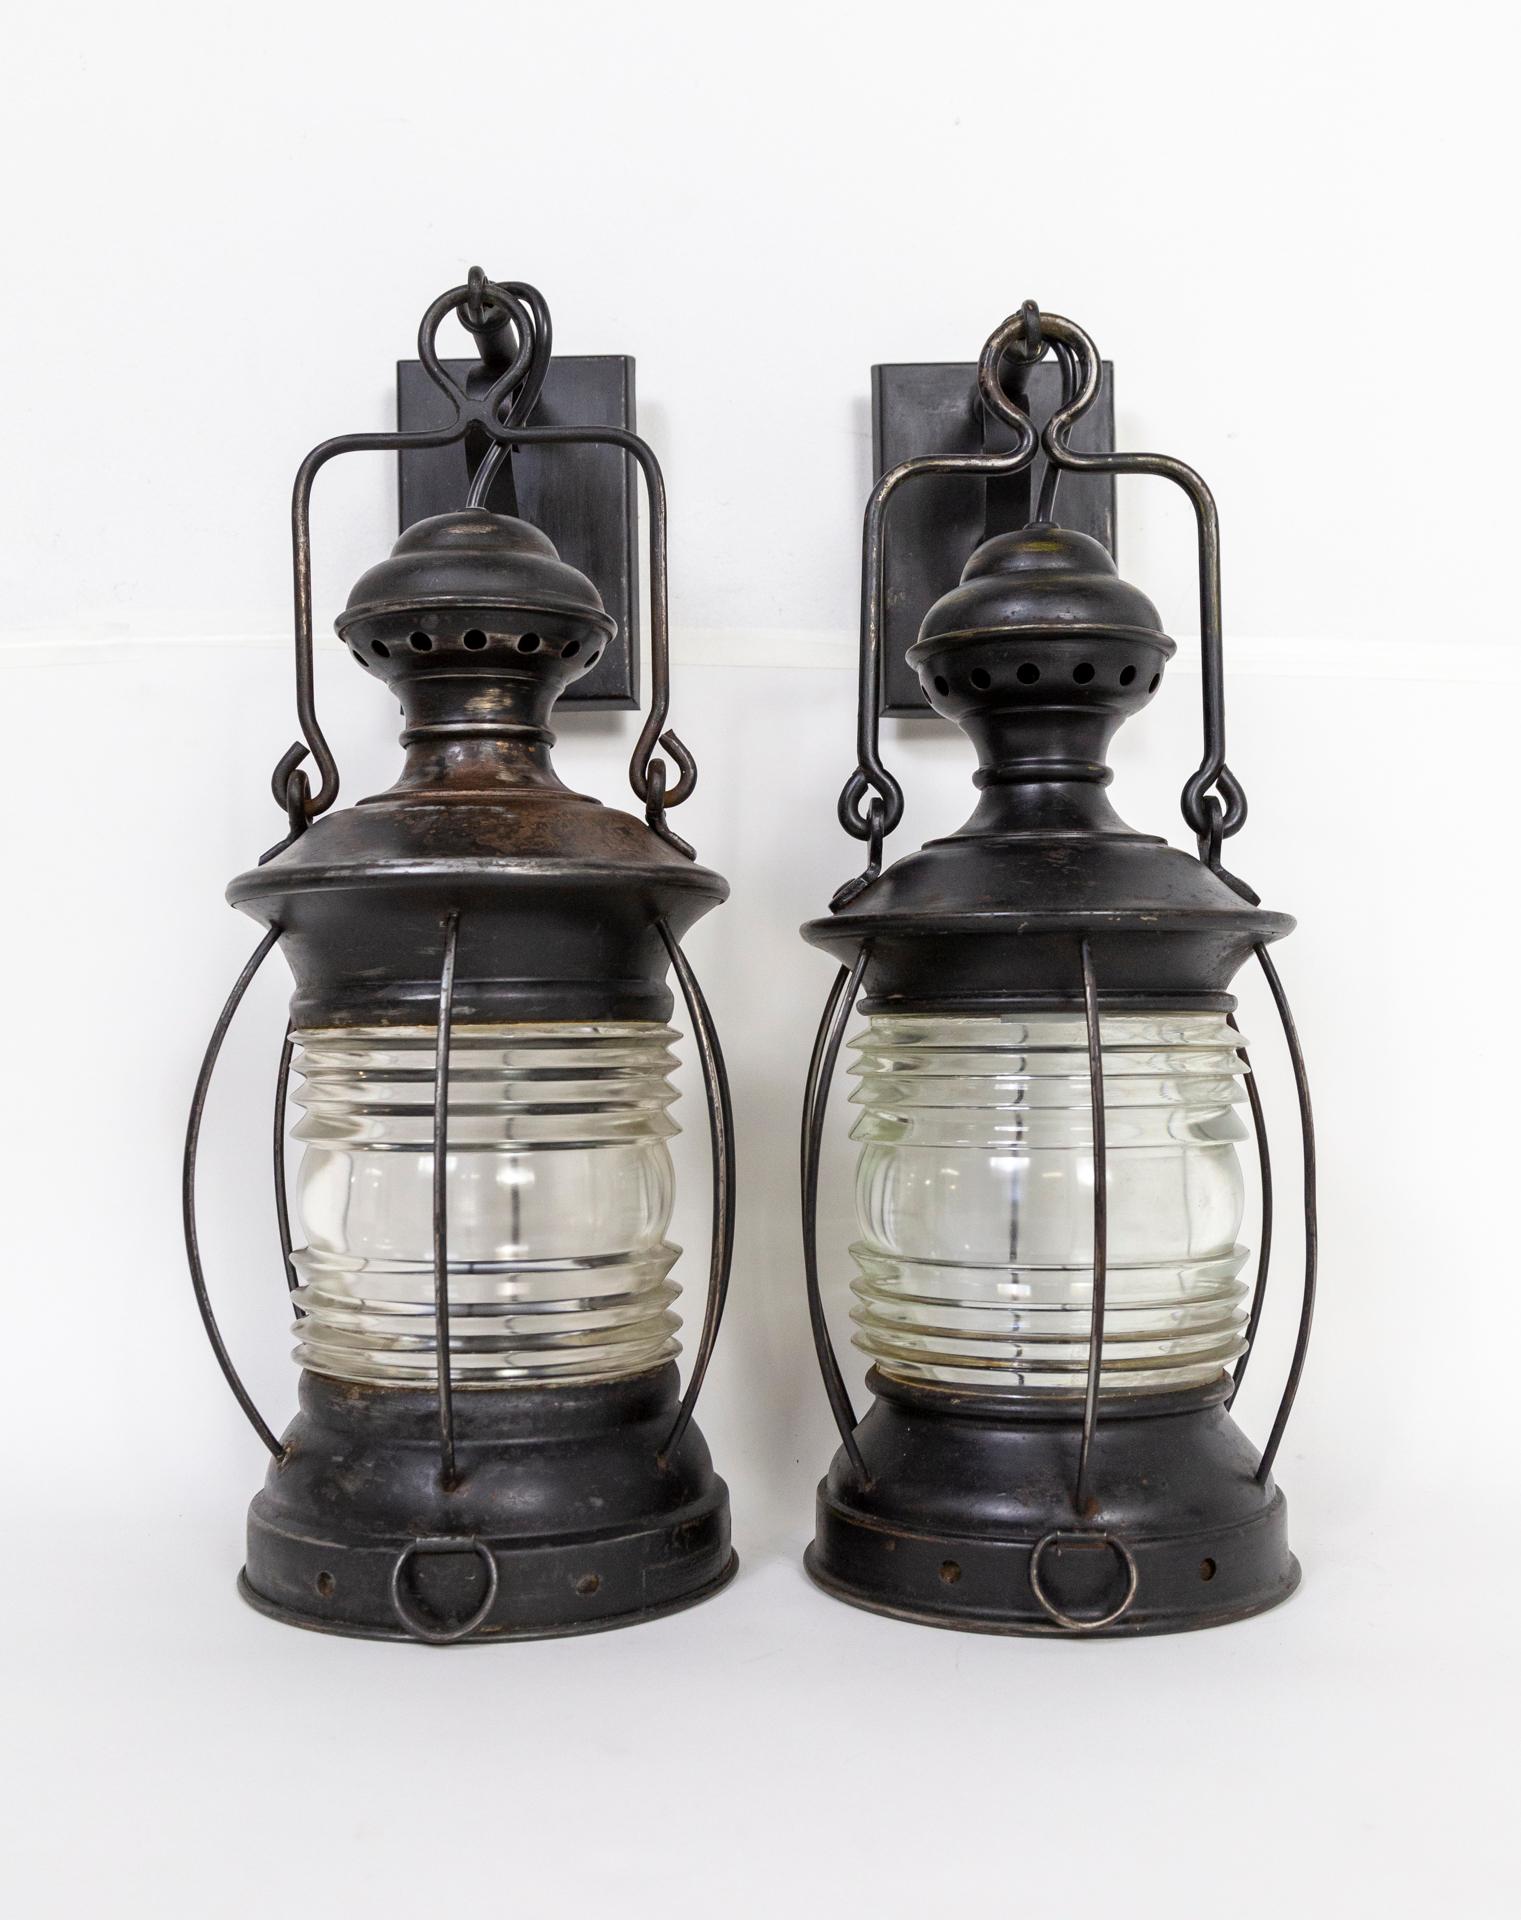 A pair of circa 1880, black painted, nautical lantern wall lights. Newly electrified, originally oil lamps. Measures: 20” height x 8” width x 10” projection.
      